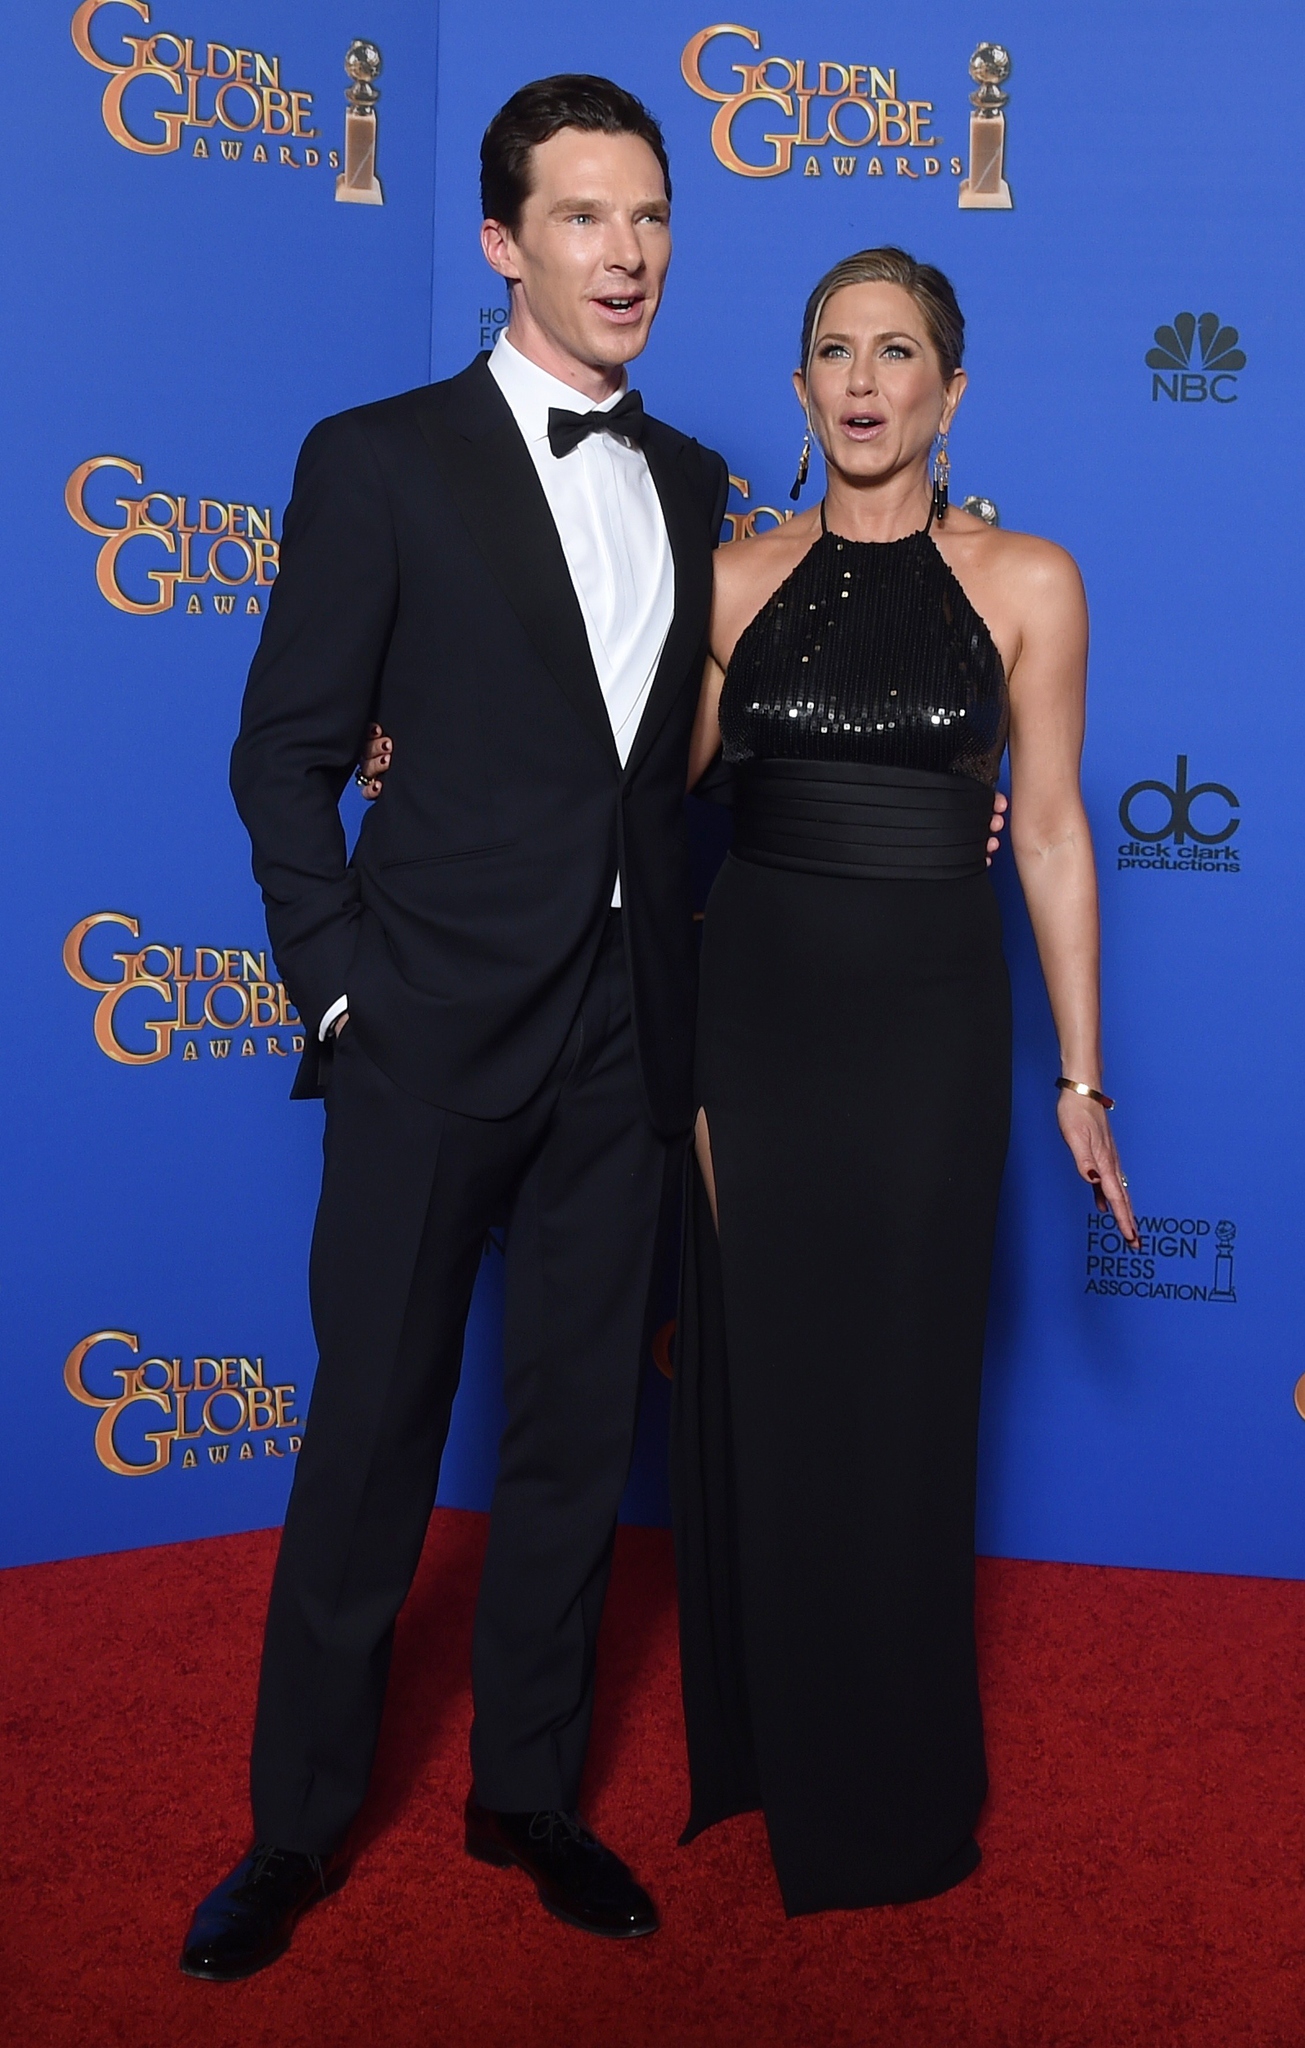 Jennifer Aniston and Benedict Cumberbatch at event of The 72nd Annual Golden Globe Awards (2015)